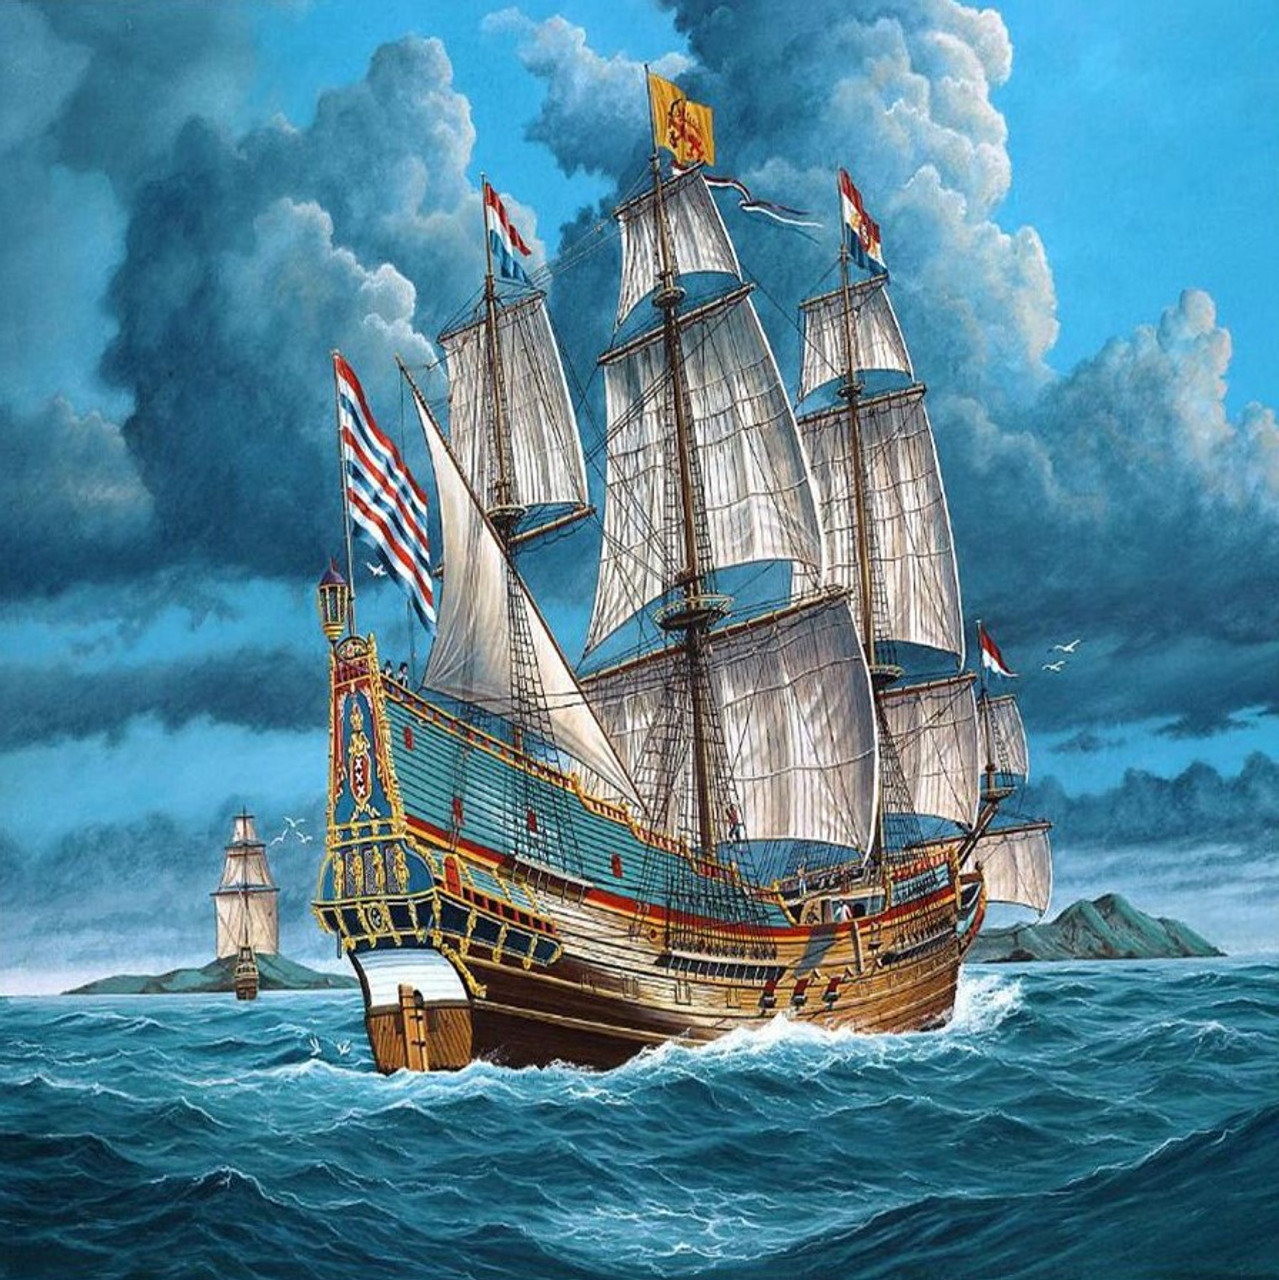 5D Diamond Painting Pirate Ship in a Bottle Kit